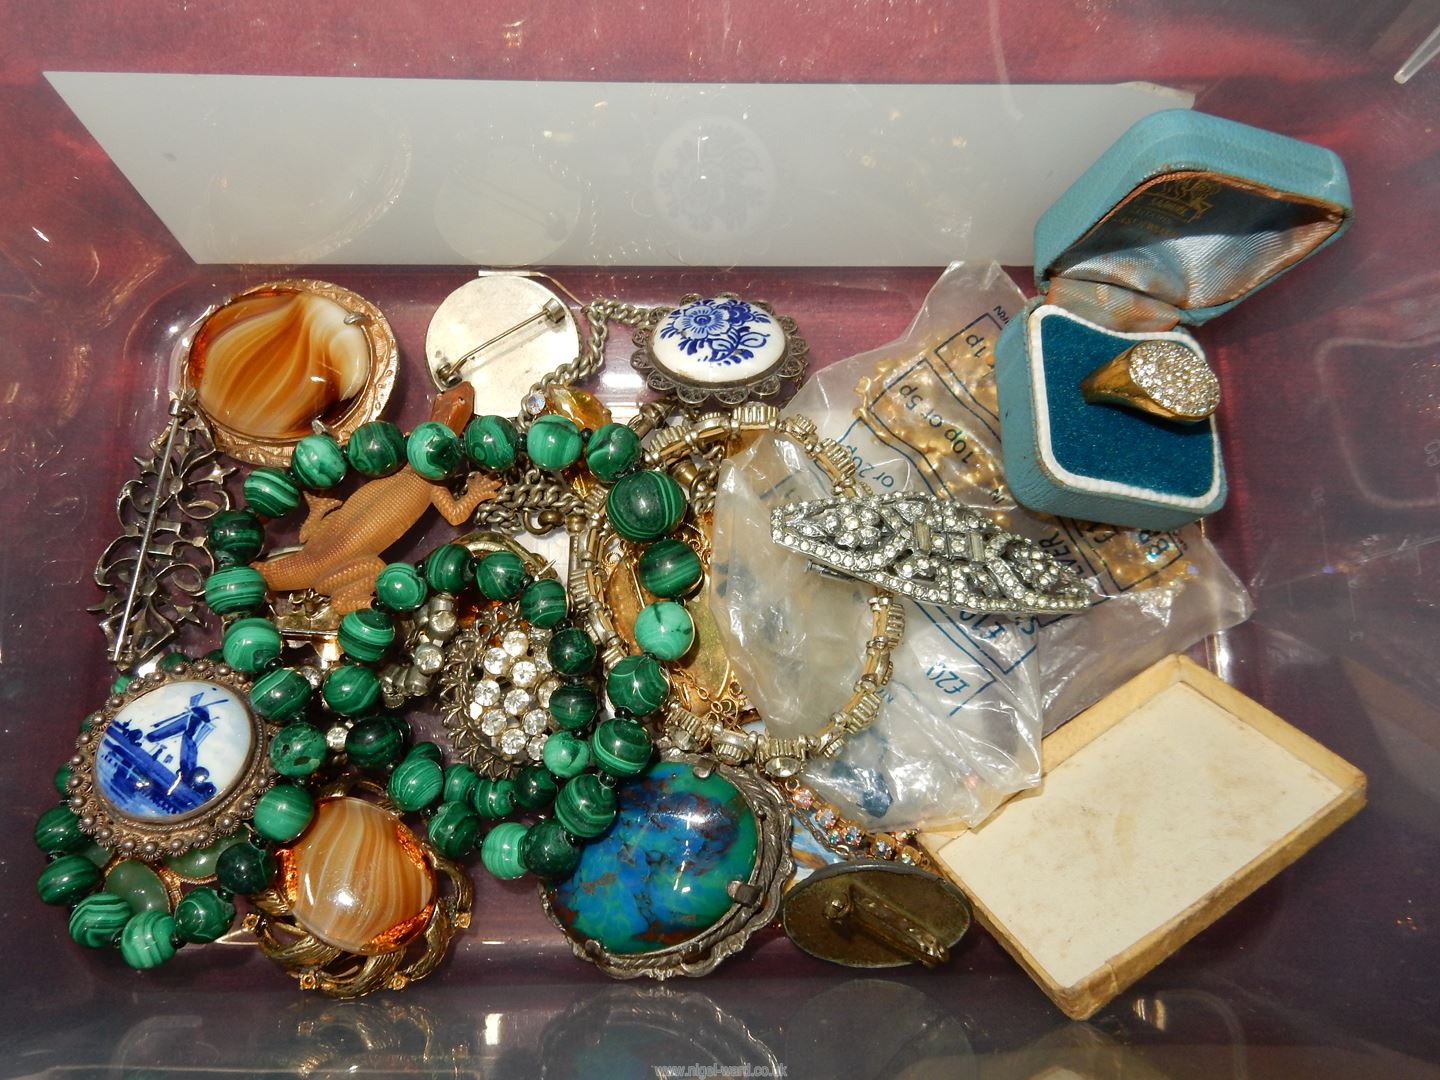 A quantity of costume jewellery mostly brooches including lizard, delft, polished semi precious. - Image 2 of 4